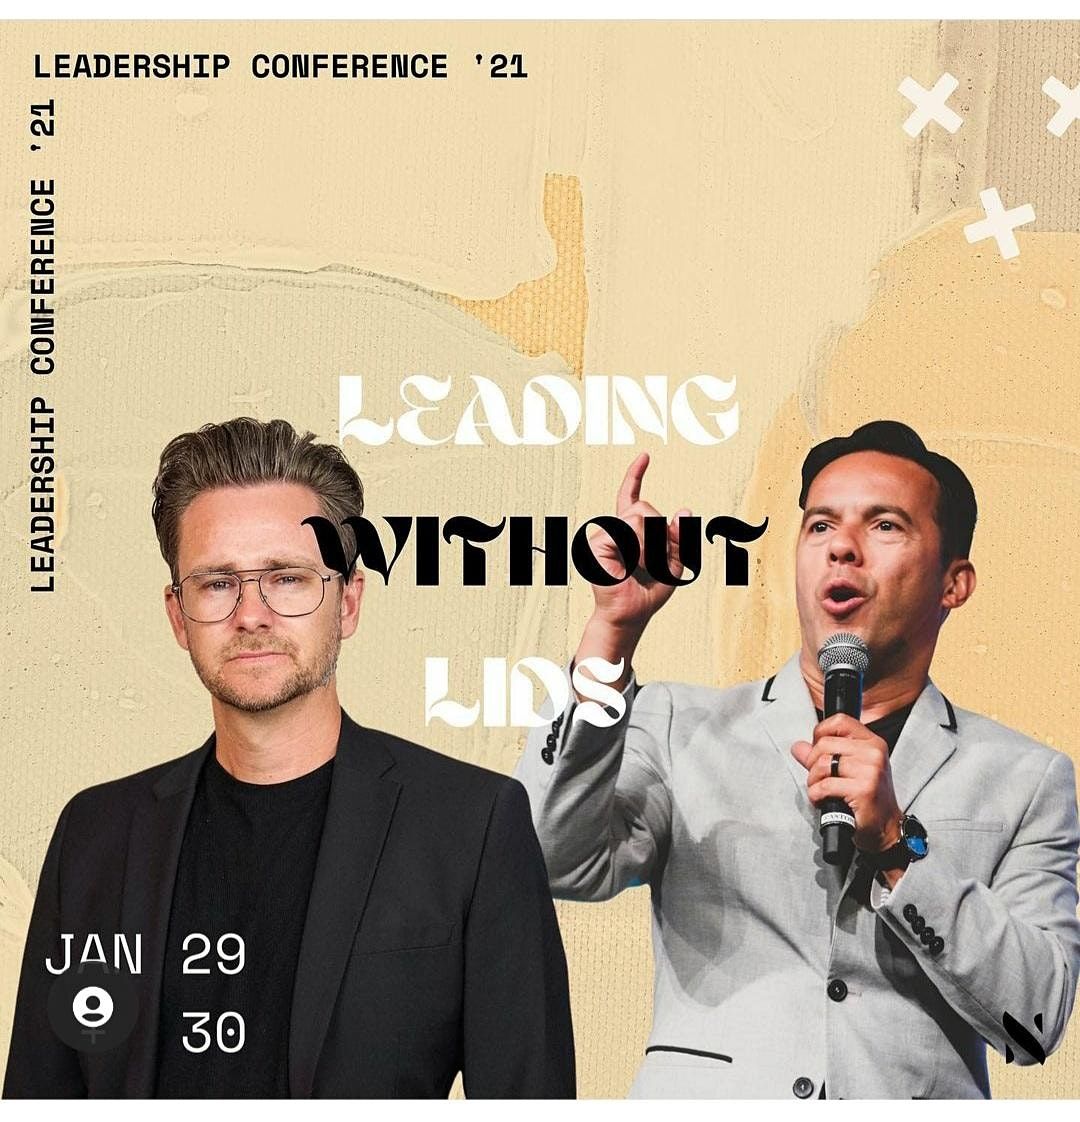 New Season Annual Leadership Conference - Leading Without Lids